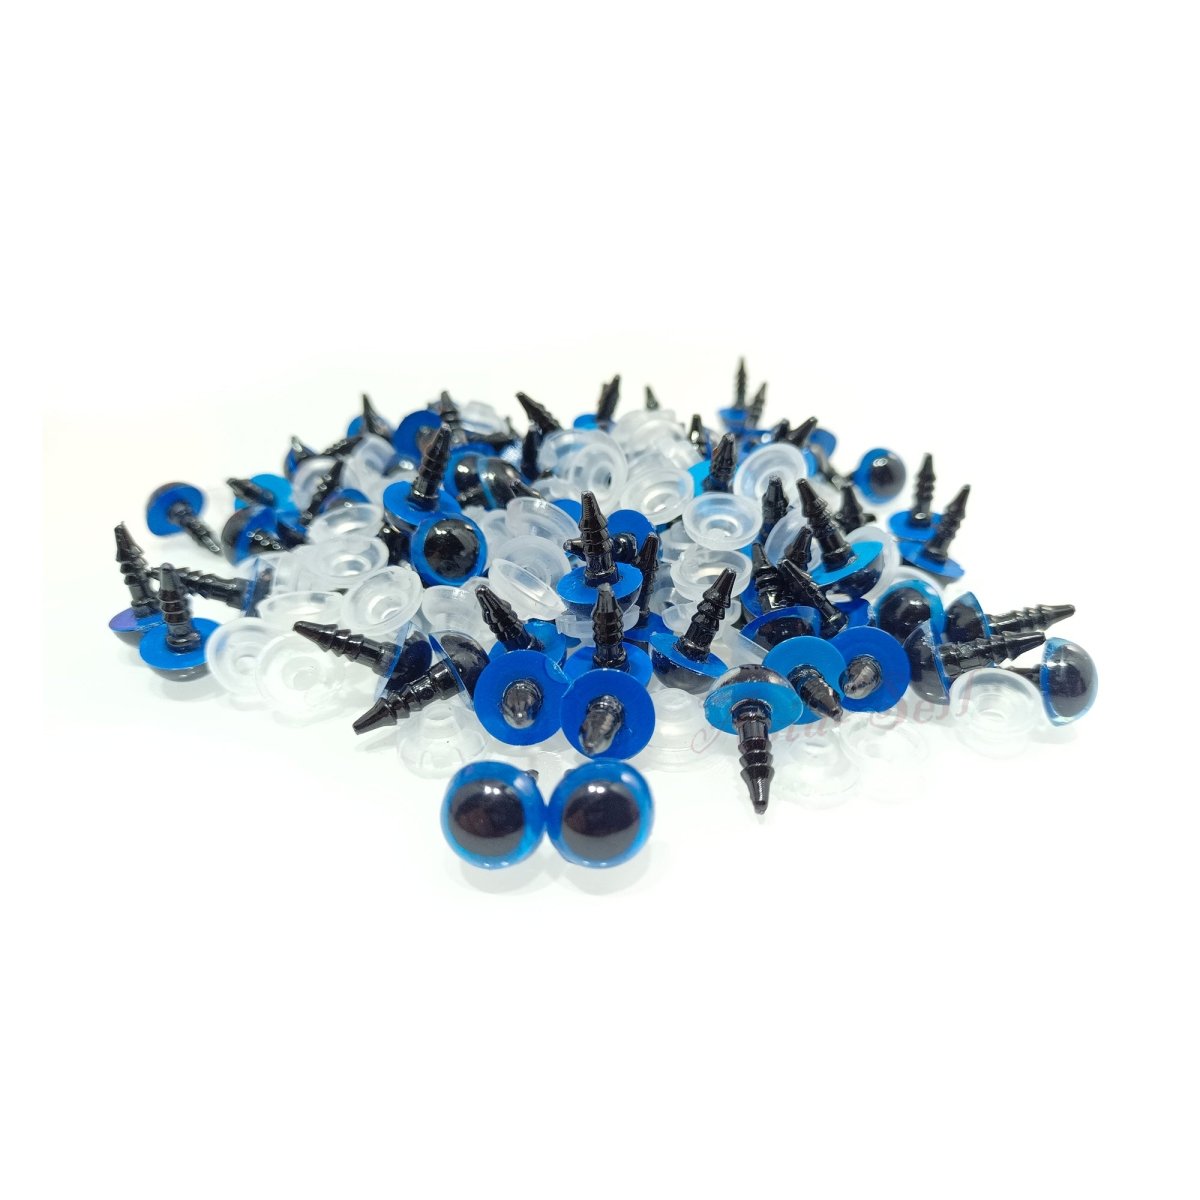 100pcs 10mm Colour Safety Eyes For Teddy Bear Doll Animal Puppet Crafts Plastic Eyes - Blue - - Asia Sell